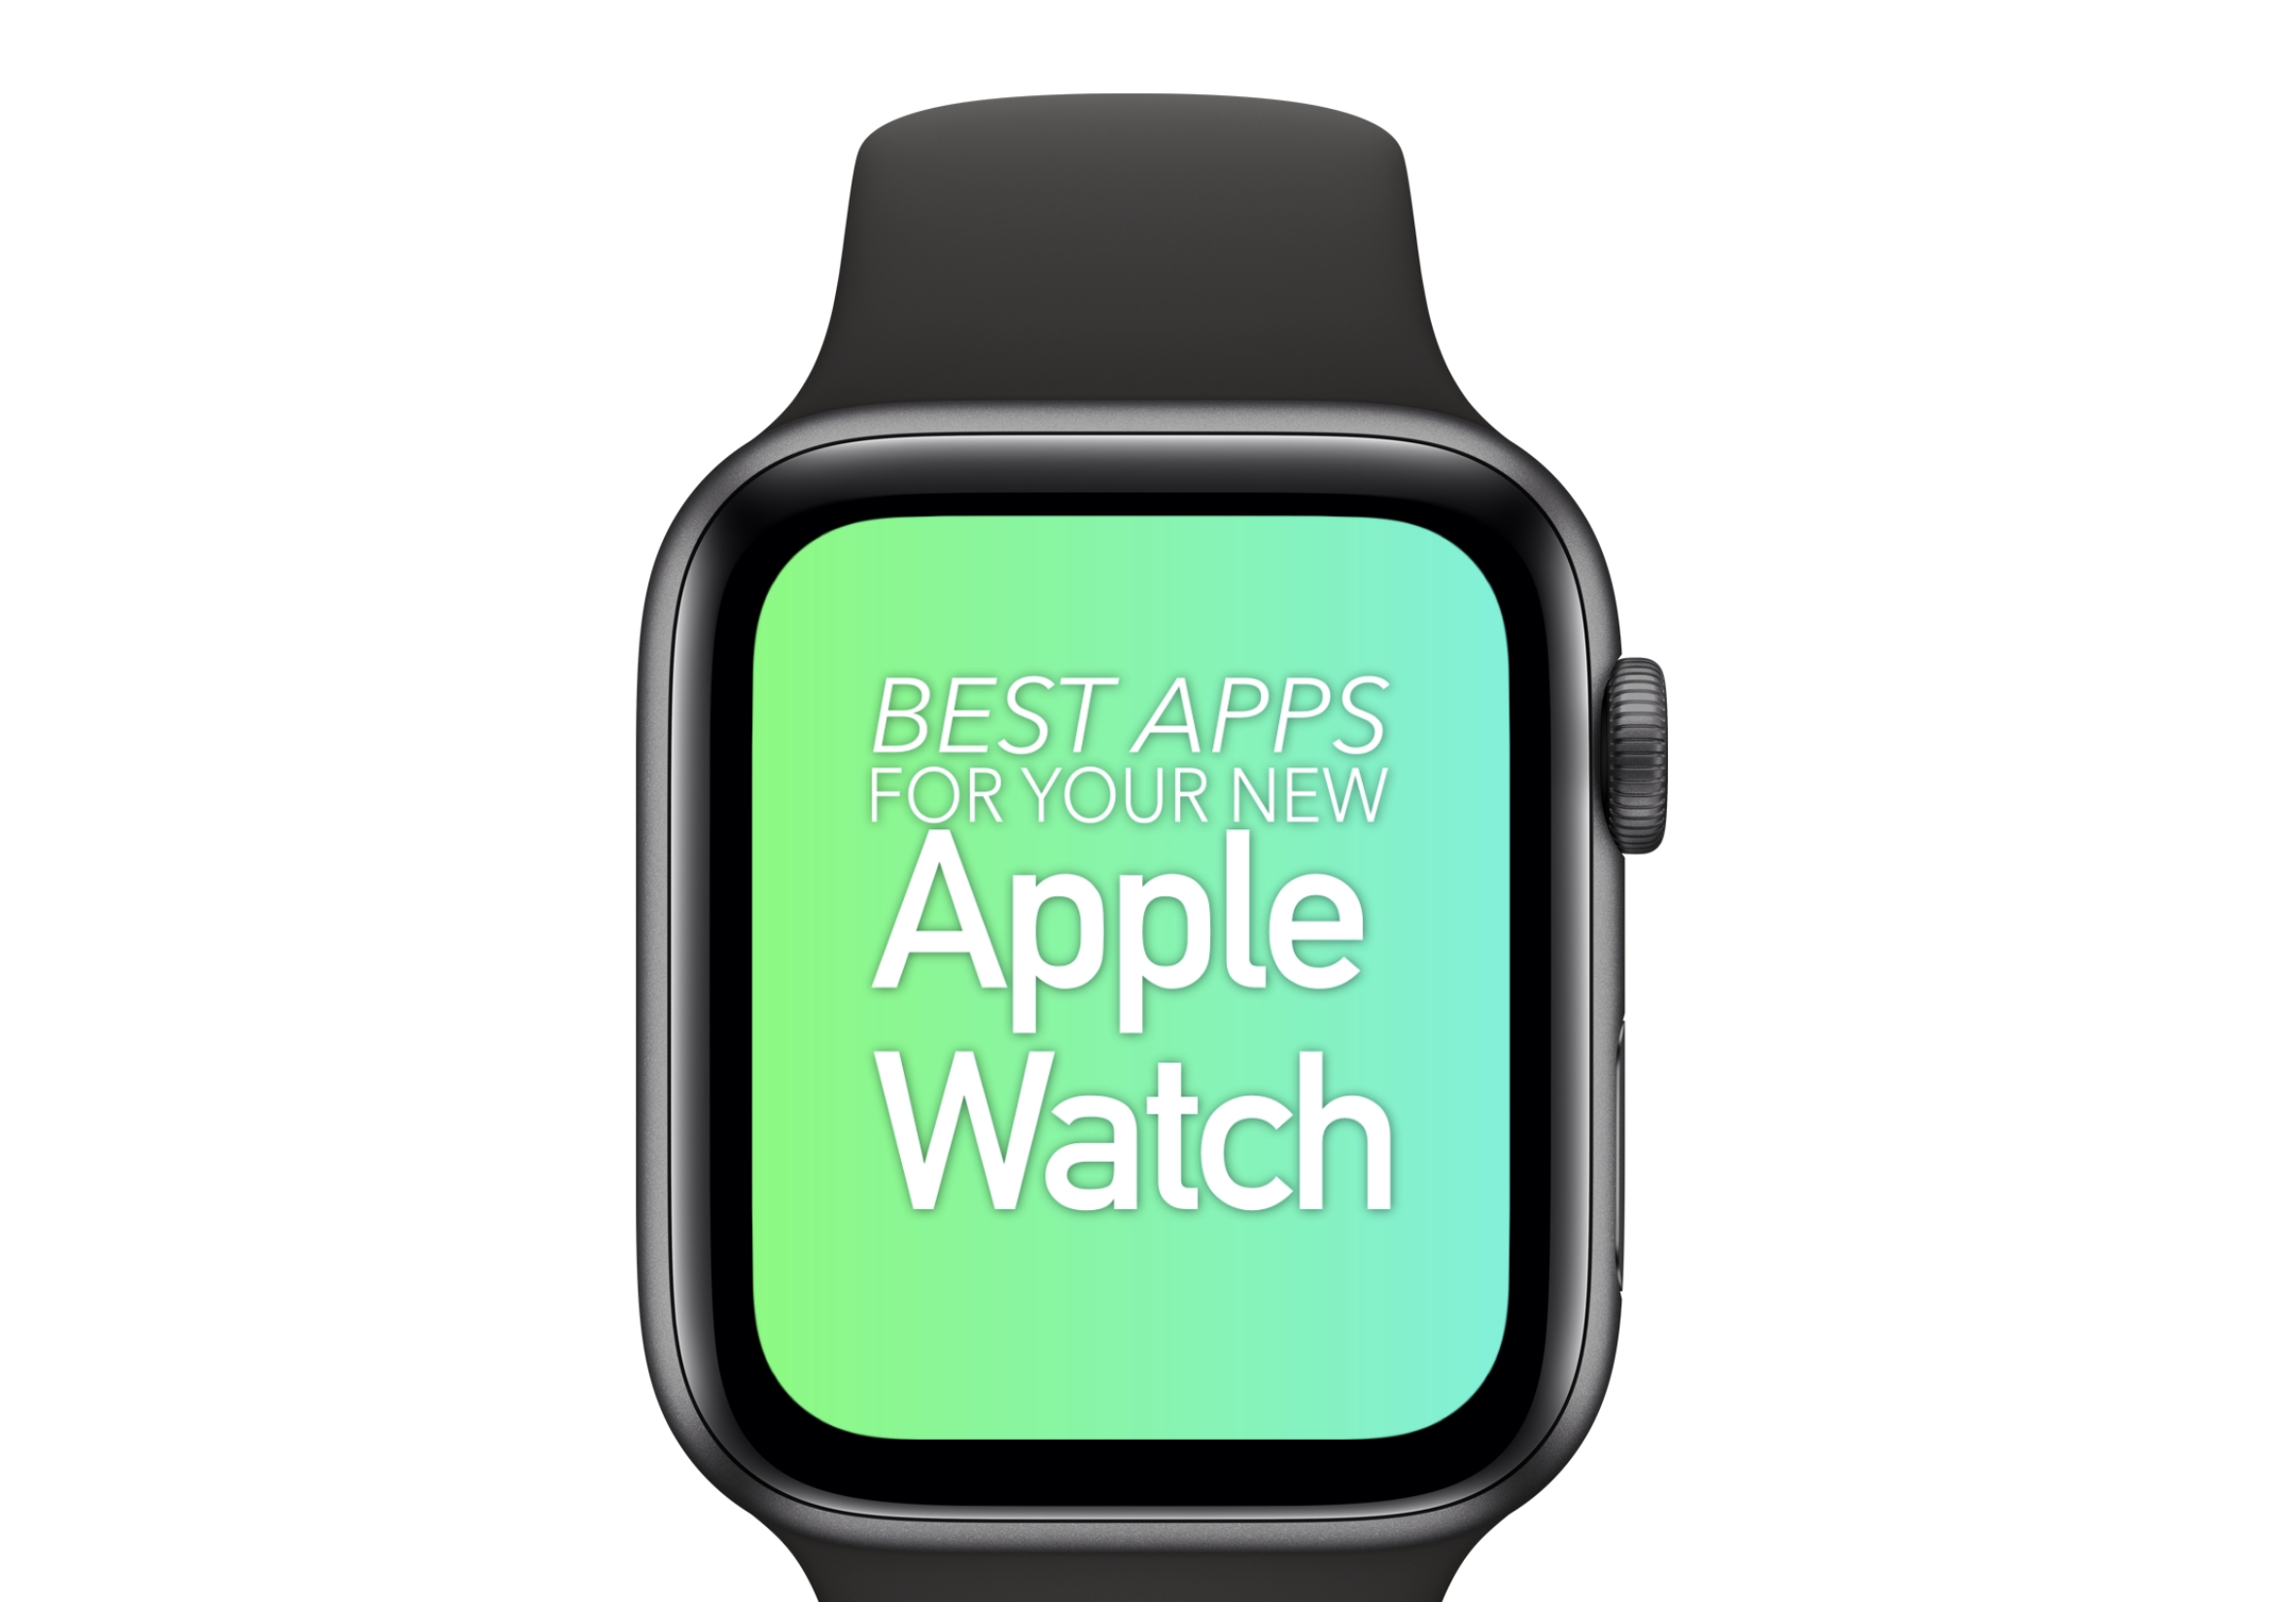 Best apps for your new Apple Watch